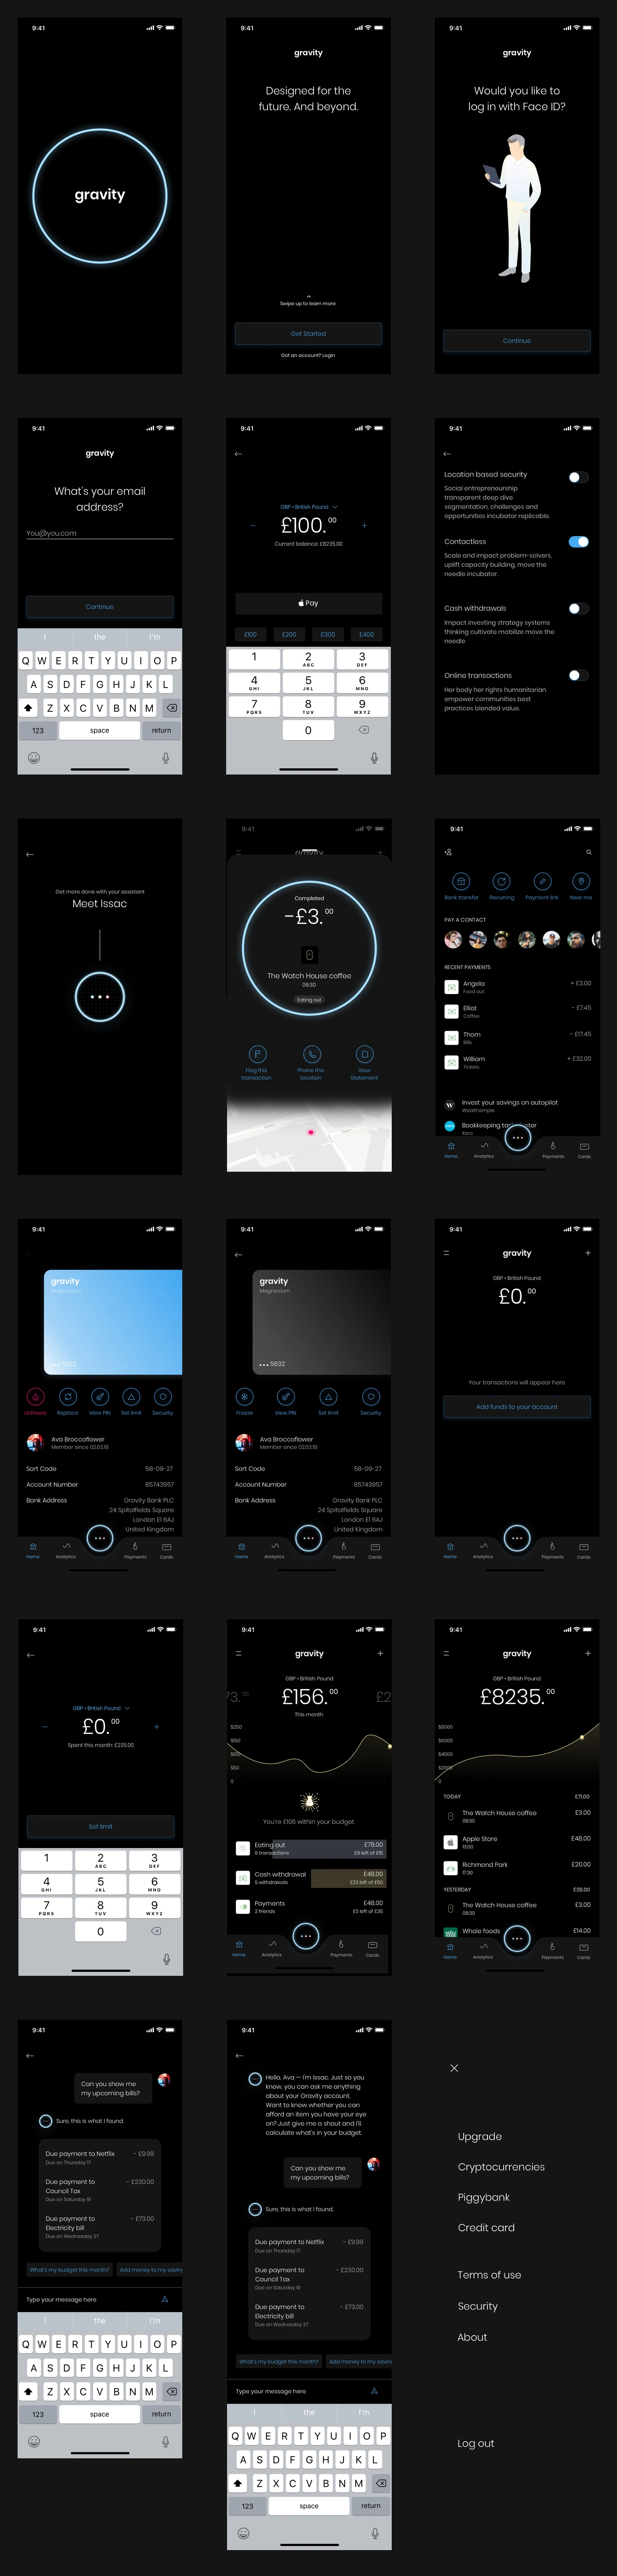 Gravity - The UI Kit - Introducing Gravity — the product of experimentation and creative exploration.